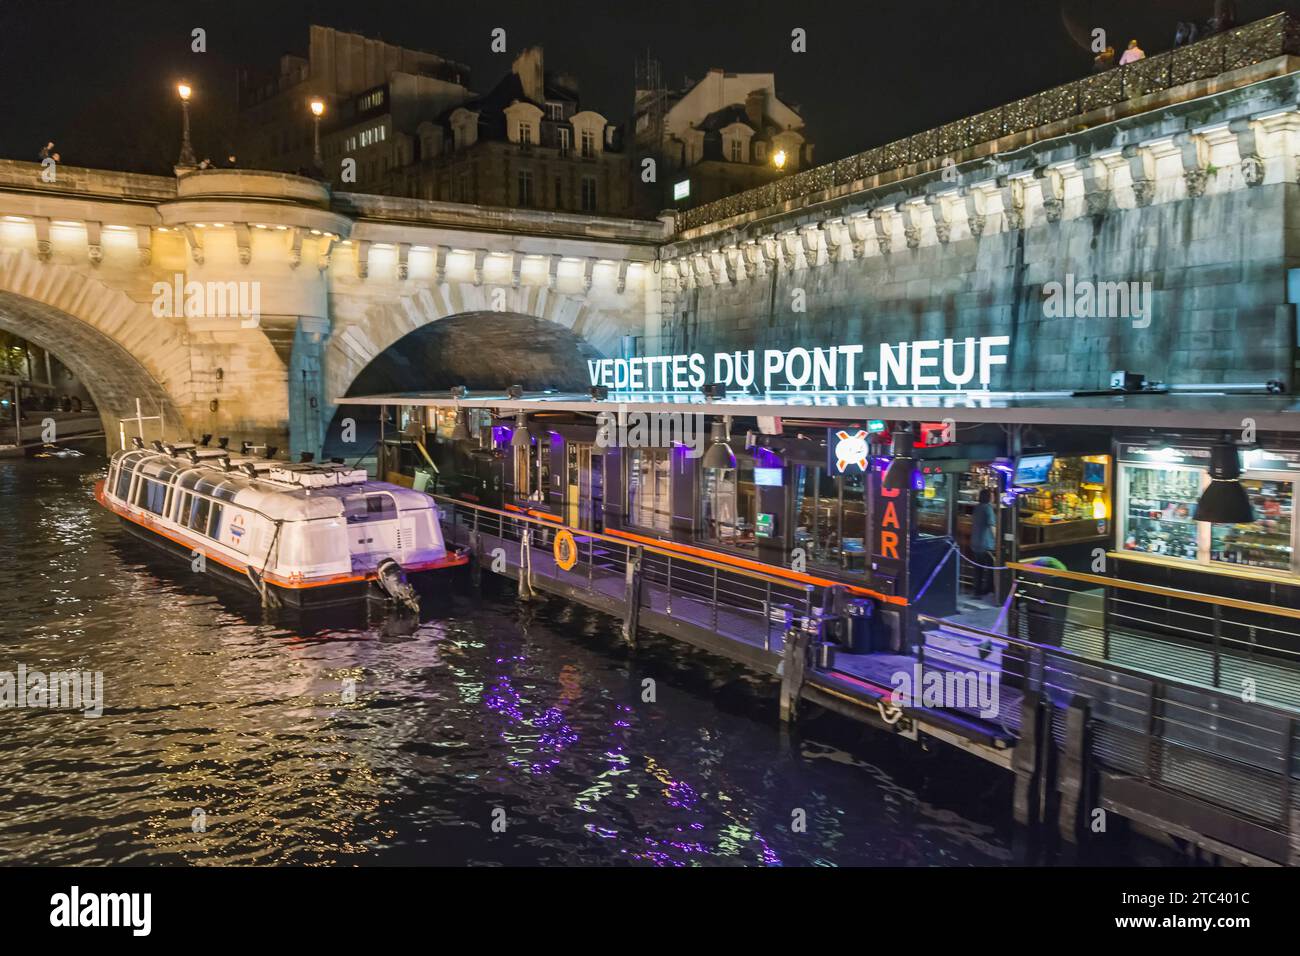 Paris, France. Port of the Vedettes du Pont-Neuf at night. Bateaux. Sightseeing boat trips on the River Seine. Stock Photo